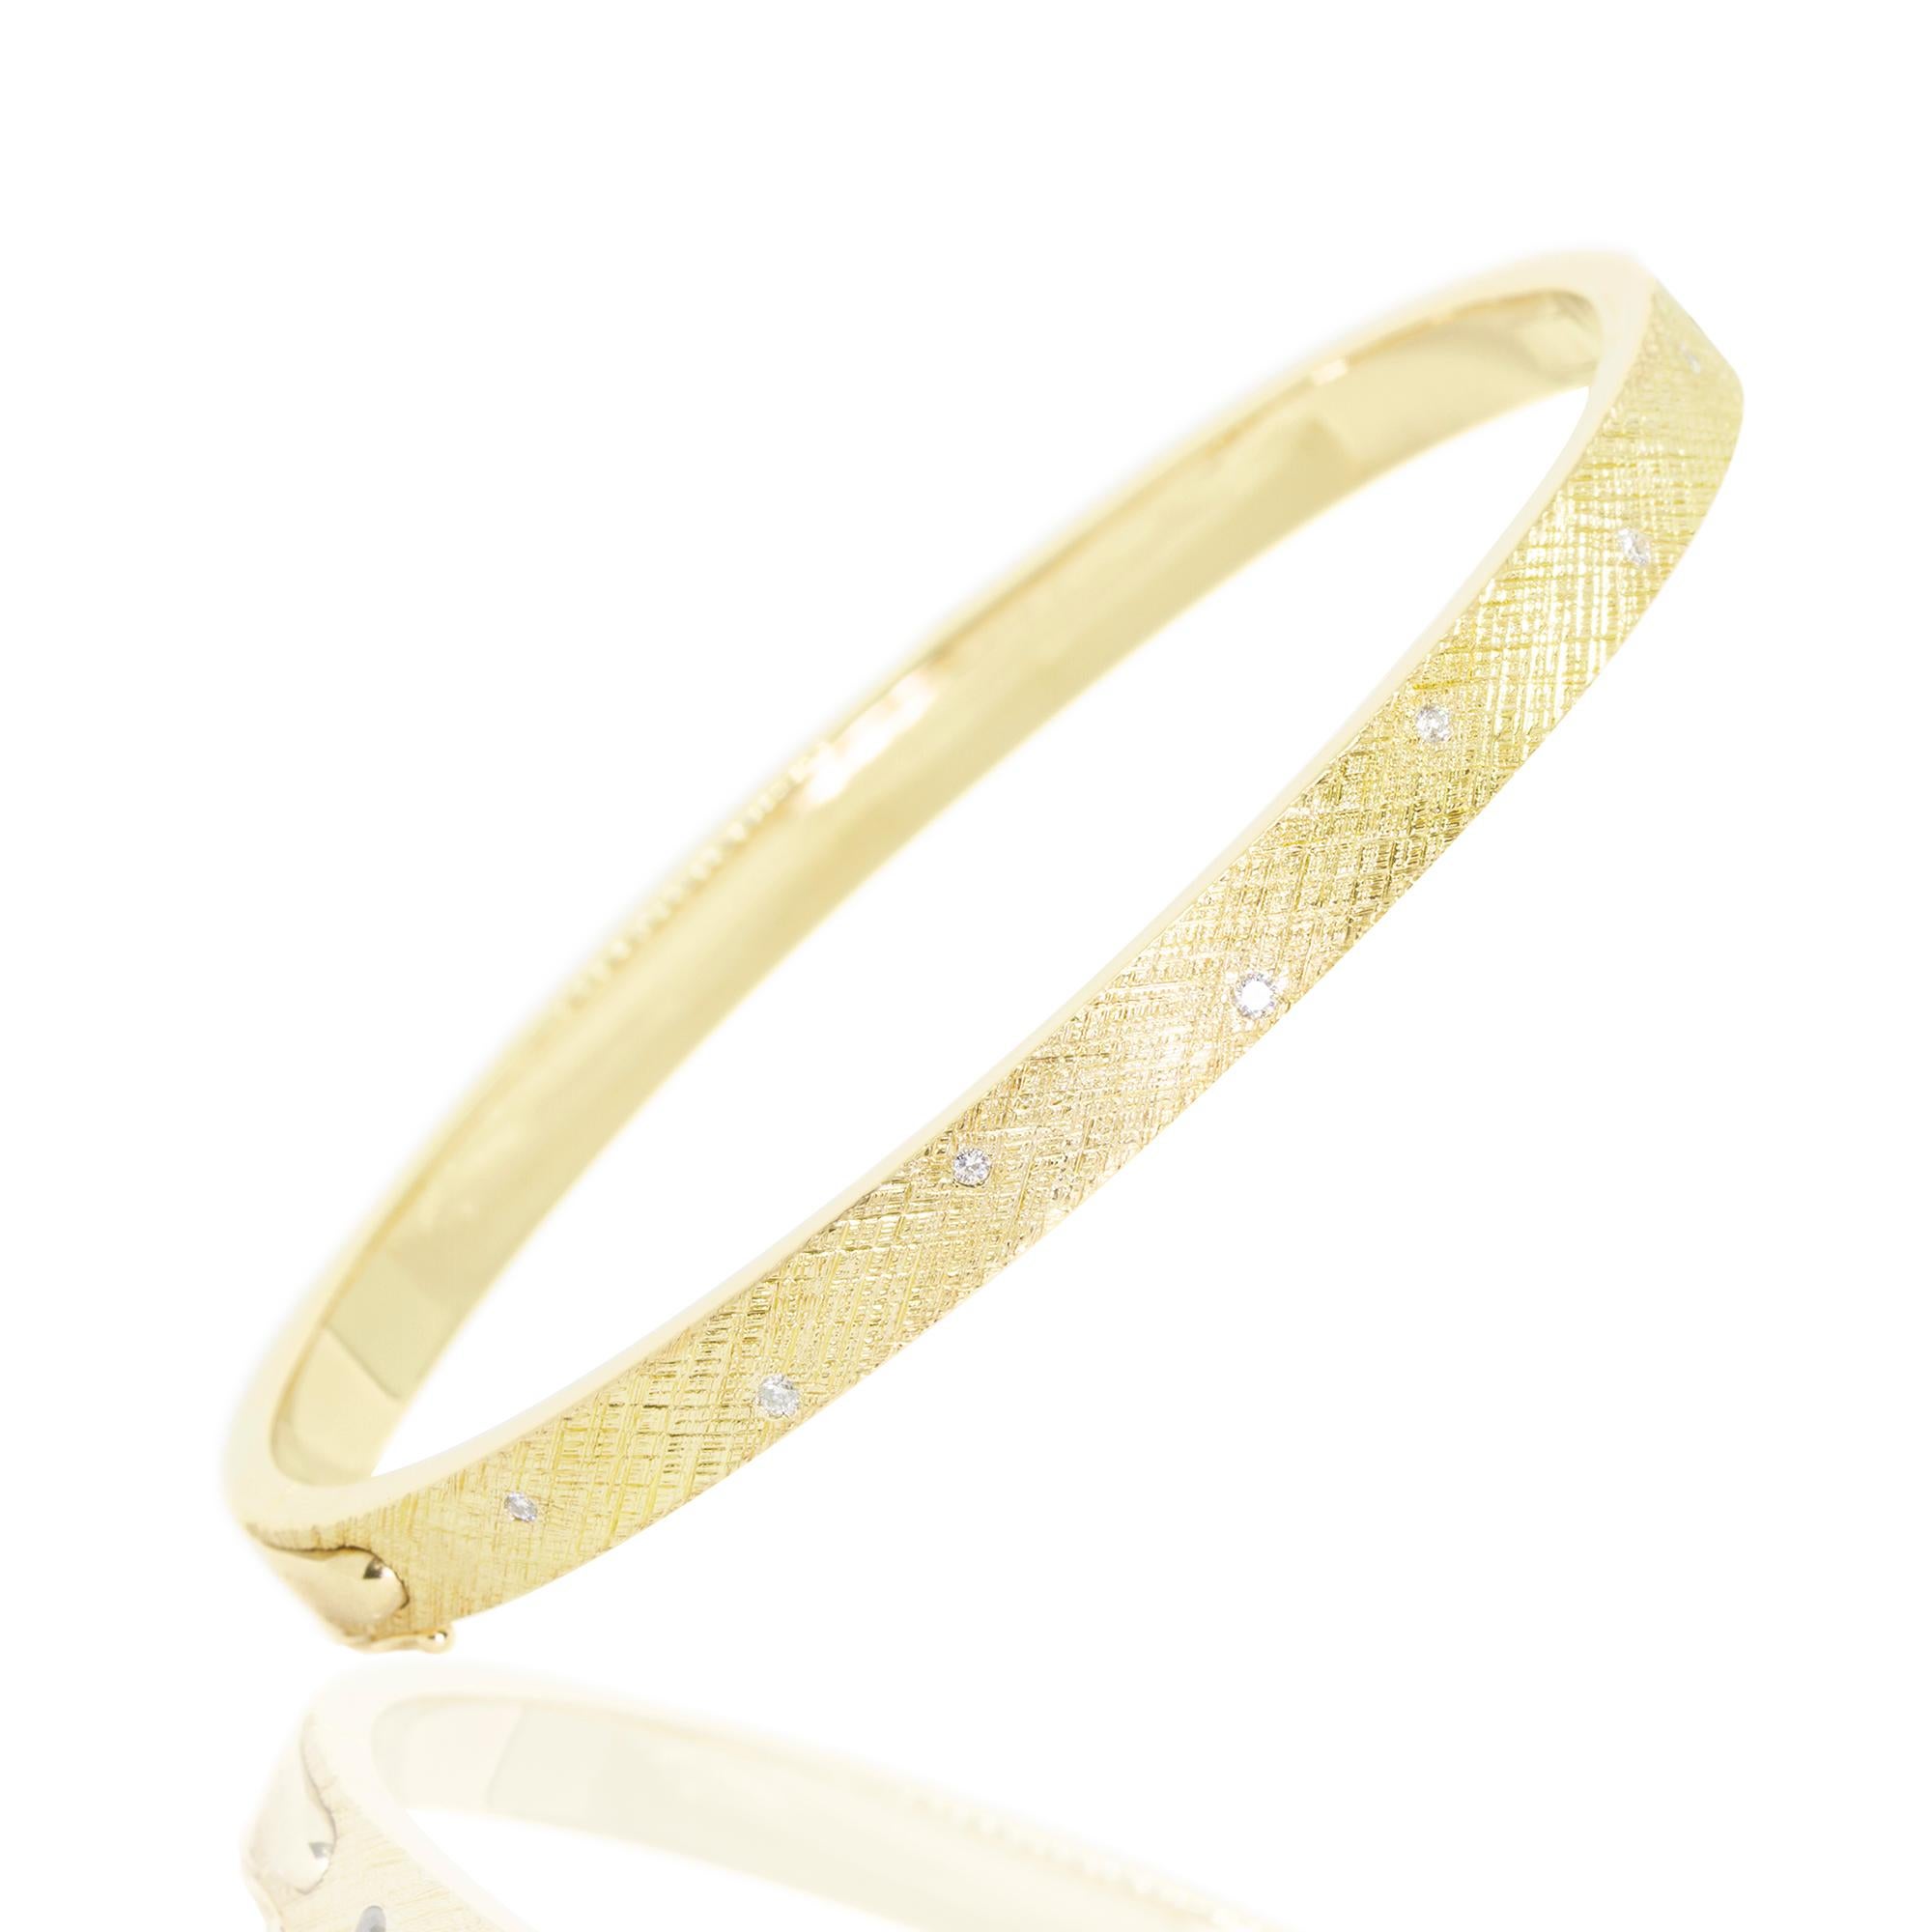 Defined by a hand-hammered crosshatch pattern with gorgeous shimmer and texture, the Florentine Gold Bangle pops with multi-colored tourmalines and diamonds and stacks beautifully with other styles from our collection. 

Stone carat: 0.3
Diamond